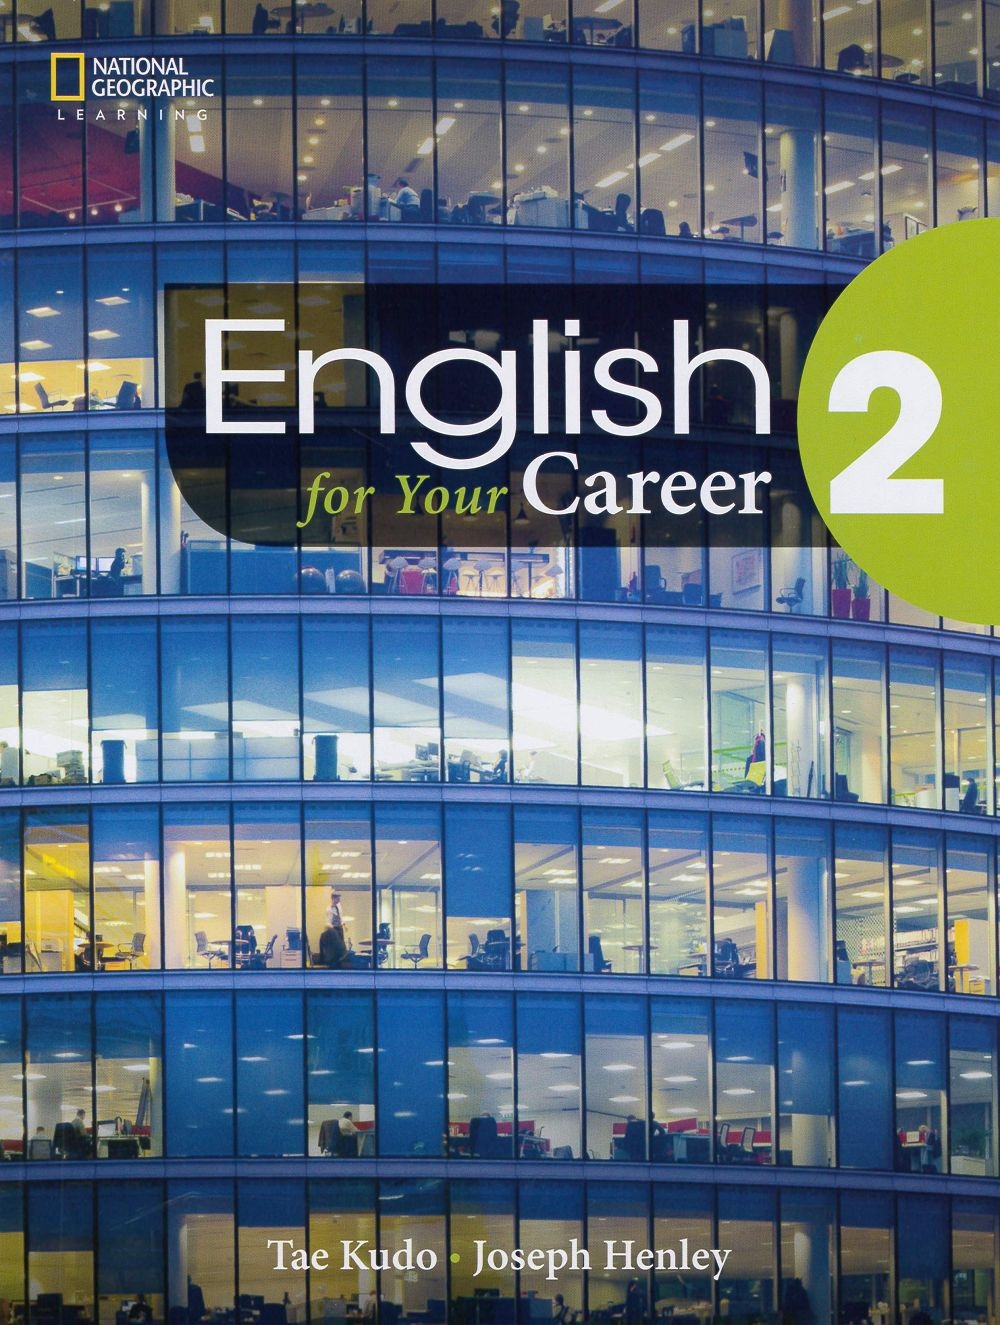 English for Your Career (2) with MP3